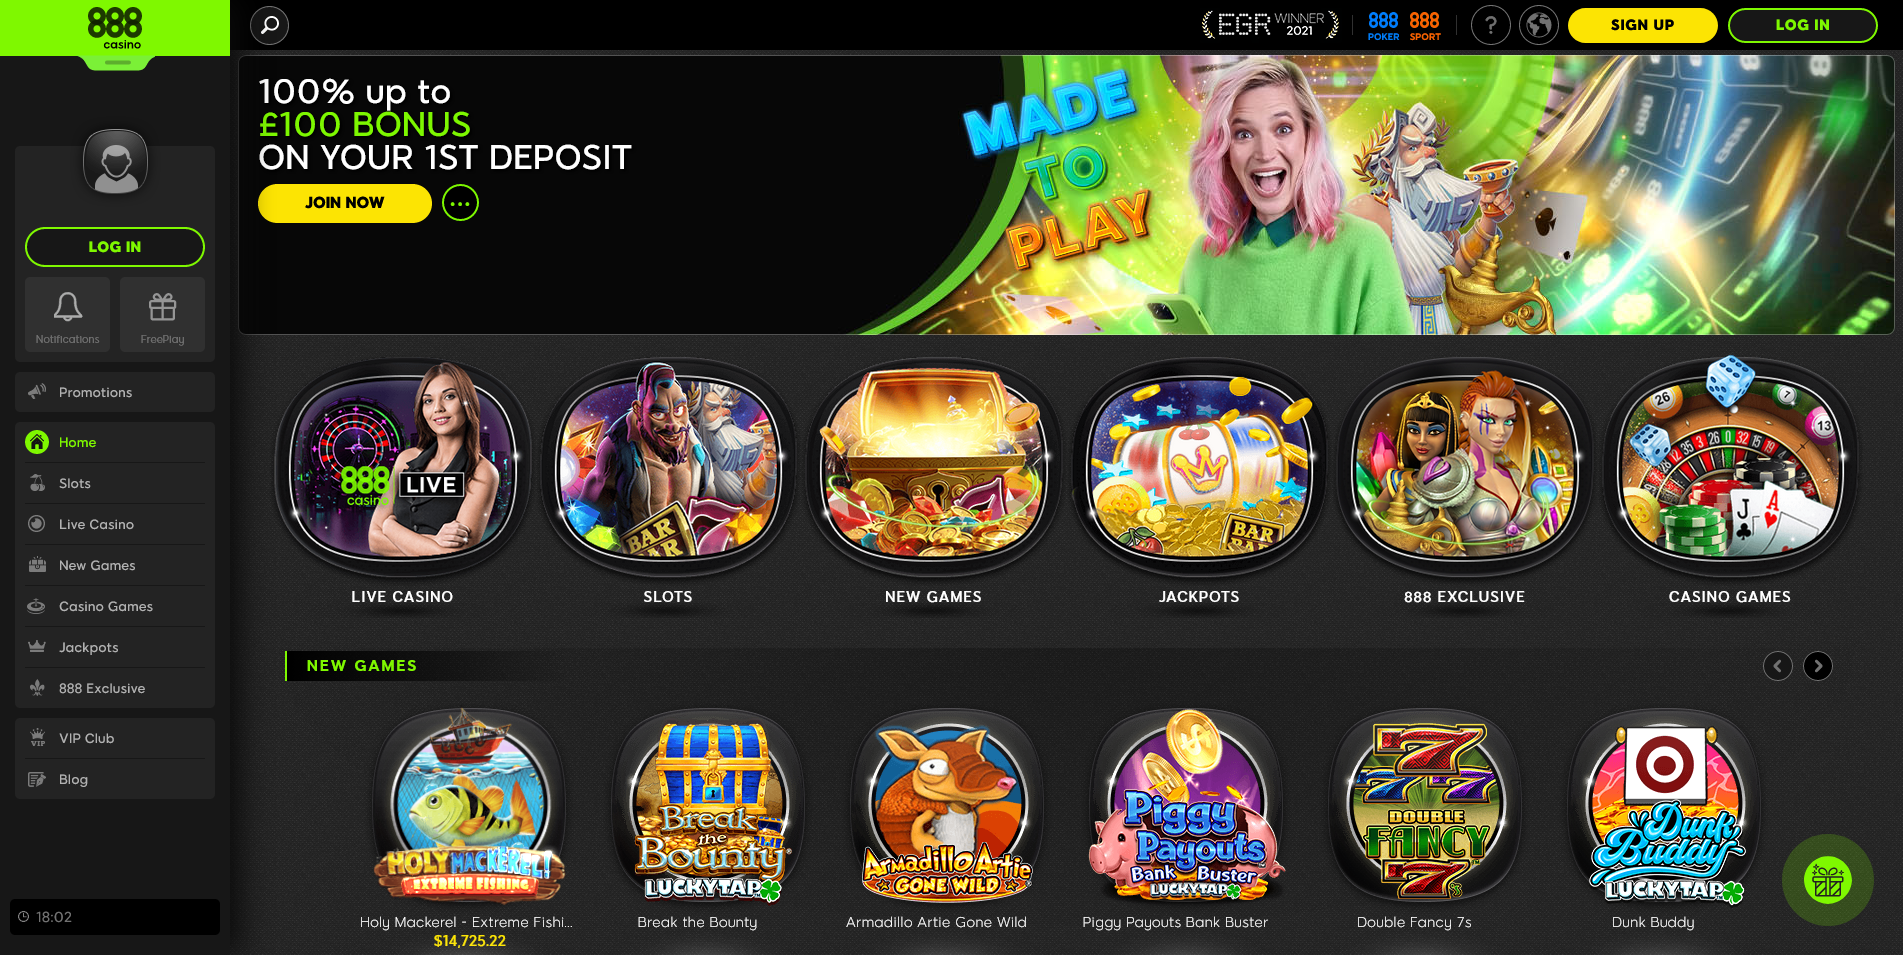 Screenshot of the 888 Casino Games Category pages